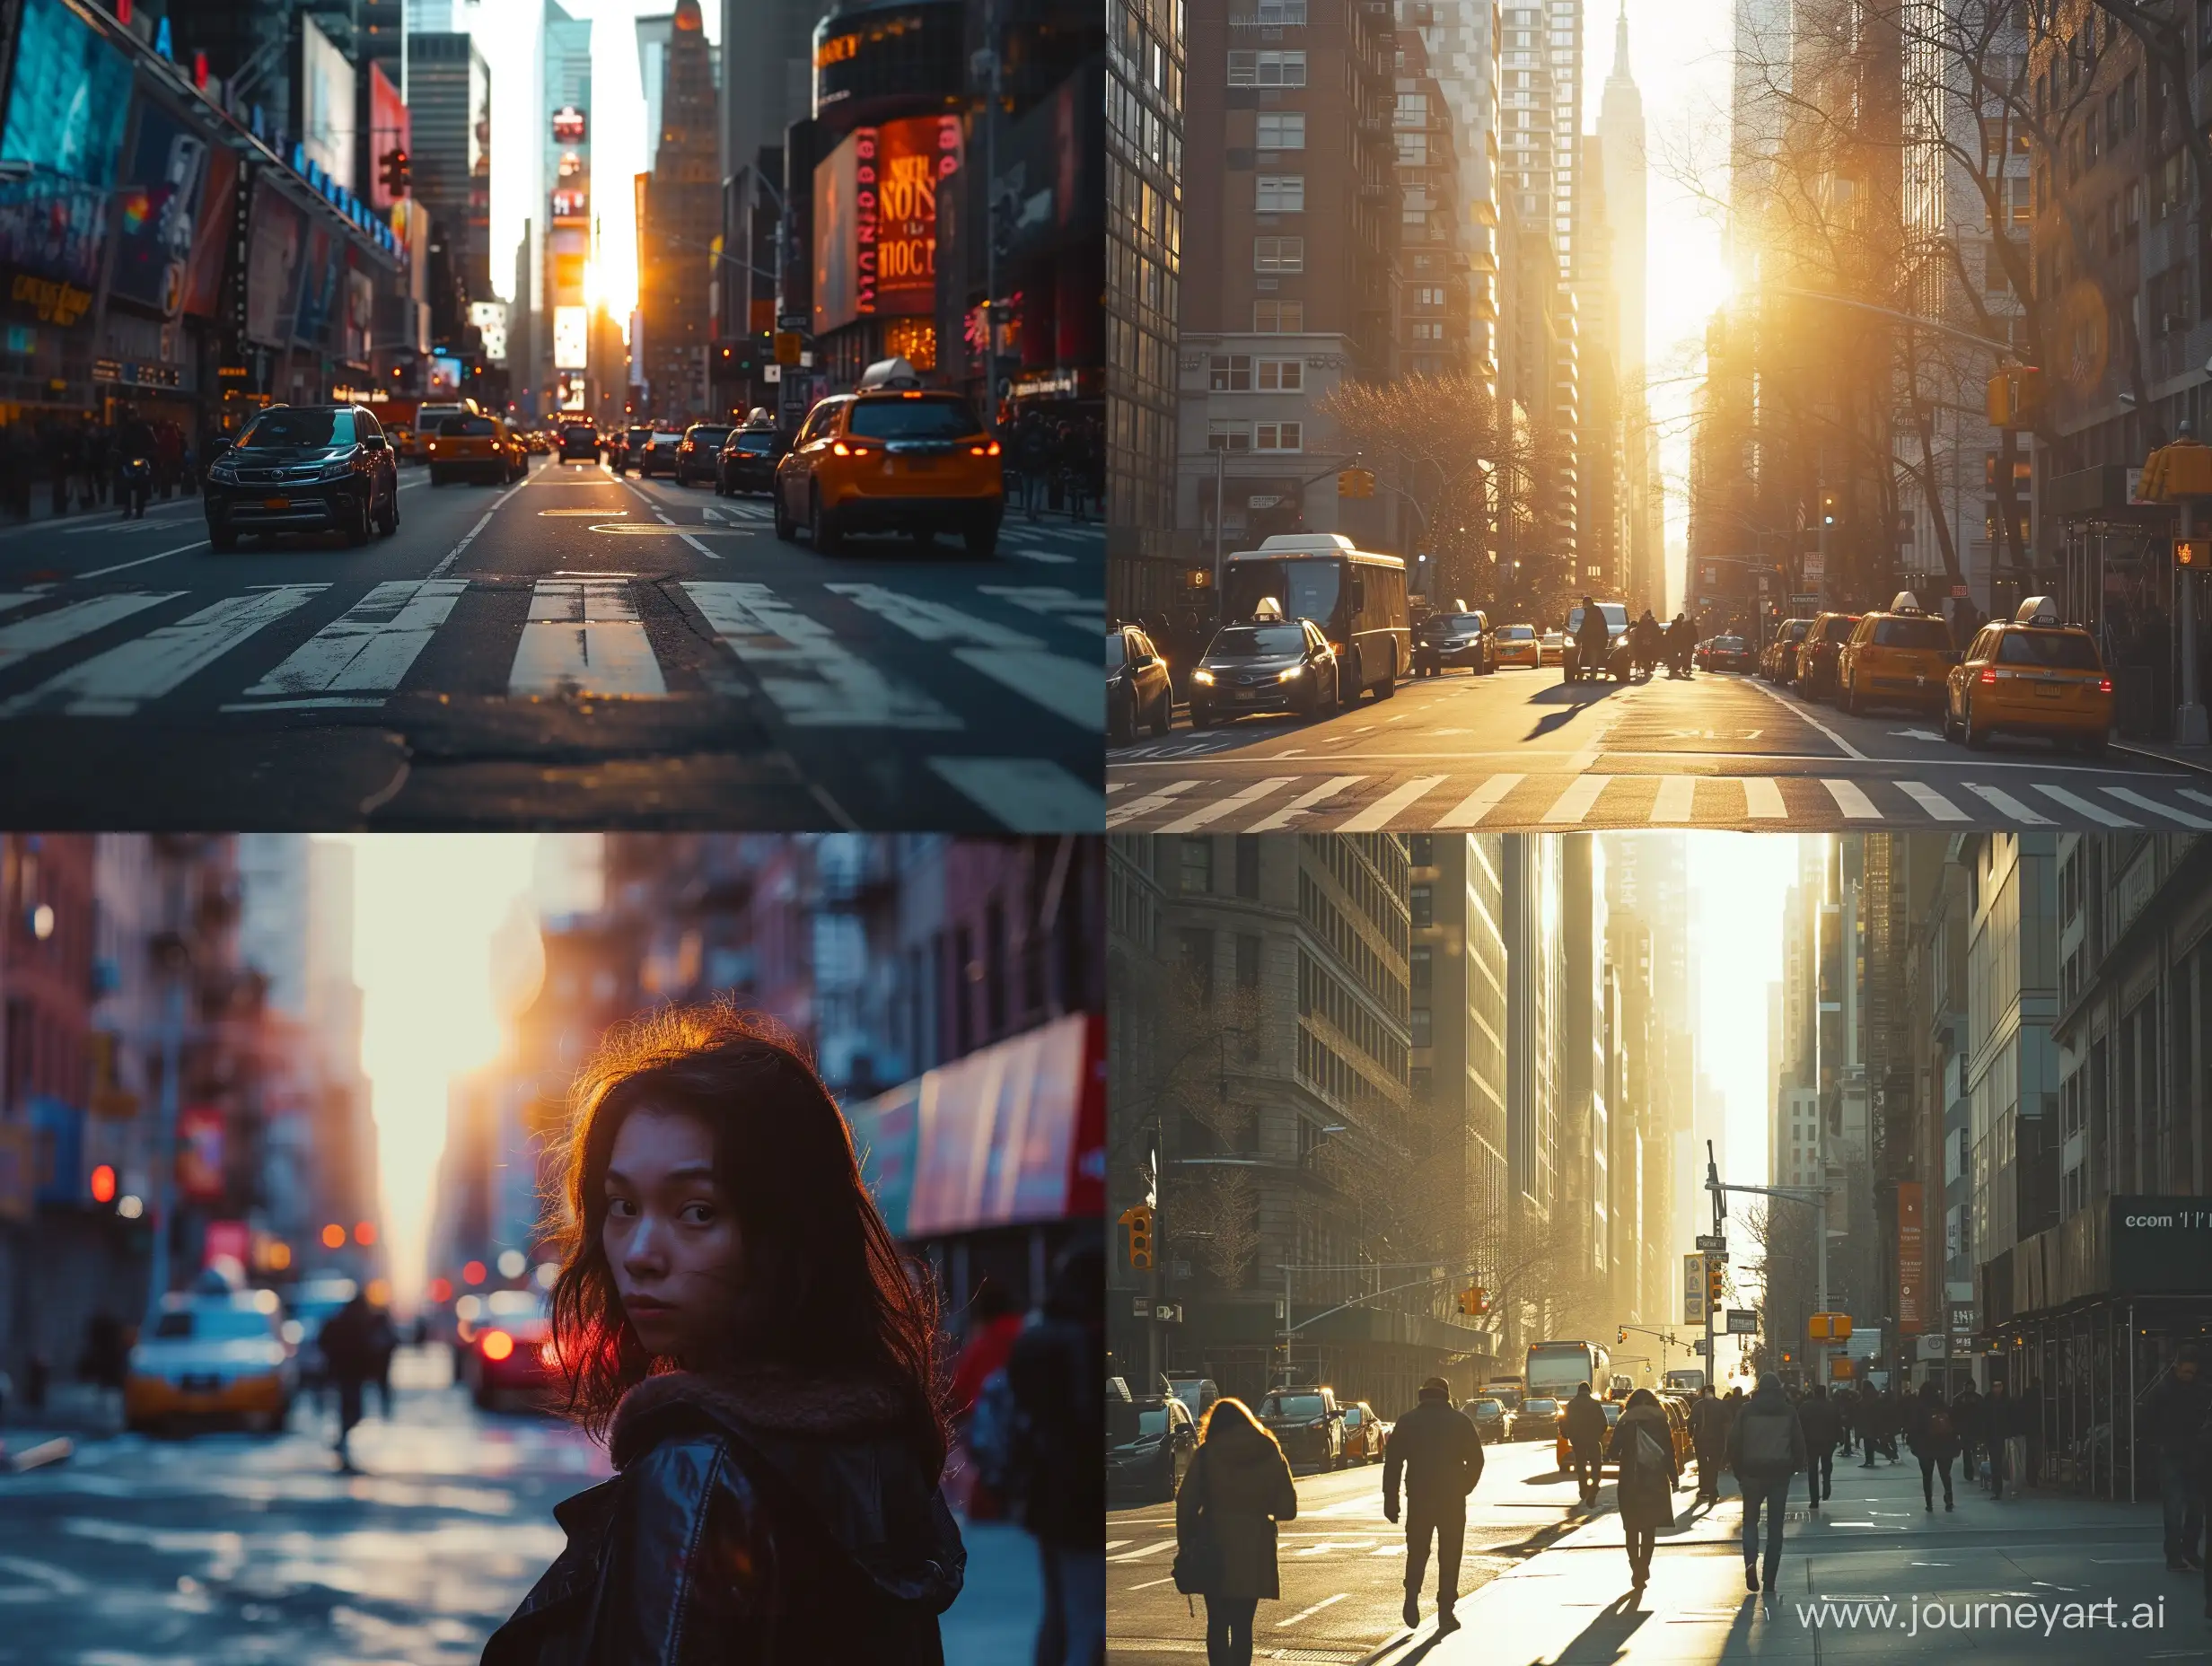 new york city, the photo is bathed in natural lighting, day time setting. Shot in 4k with a high end DSLR camera. such as a Canon EOS R5 with a 50mm f/1. 2 lens, vibrance,
